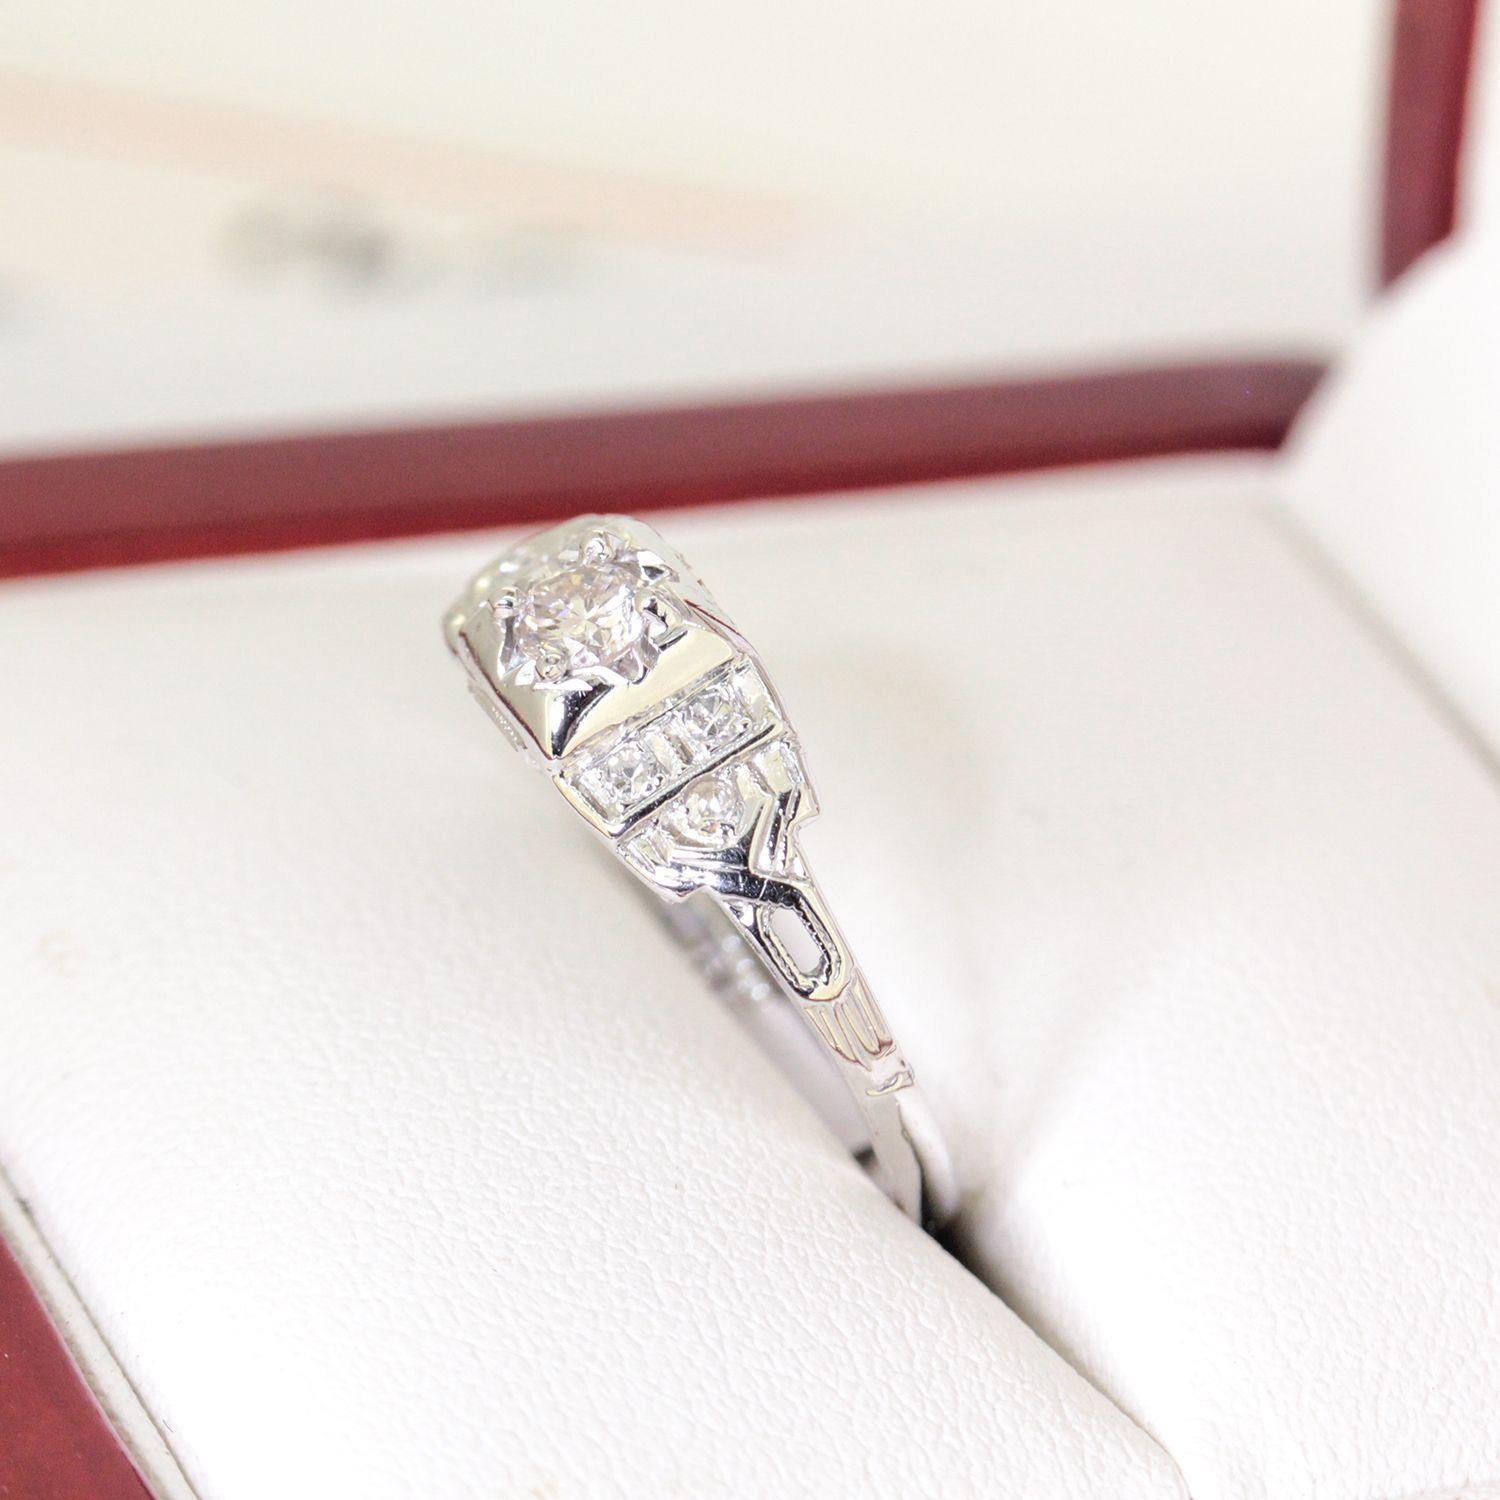 Vintage Diamond Engagement Ring, Antique Filigree Ring, White Gold In Good Condition For Sale In BALMAIN, NSW